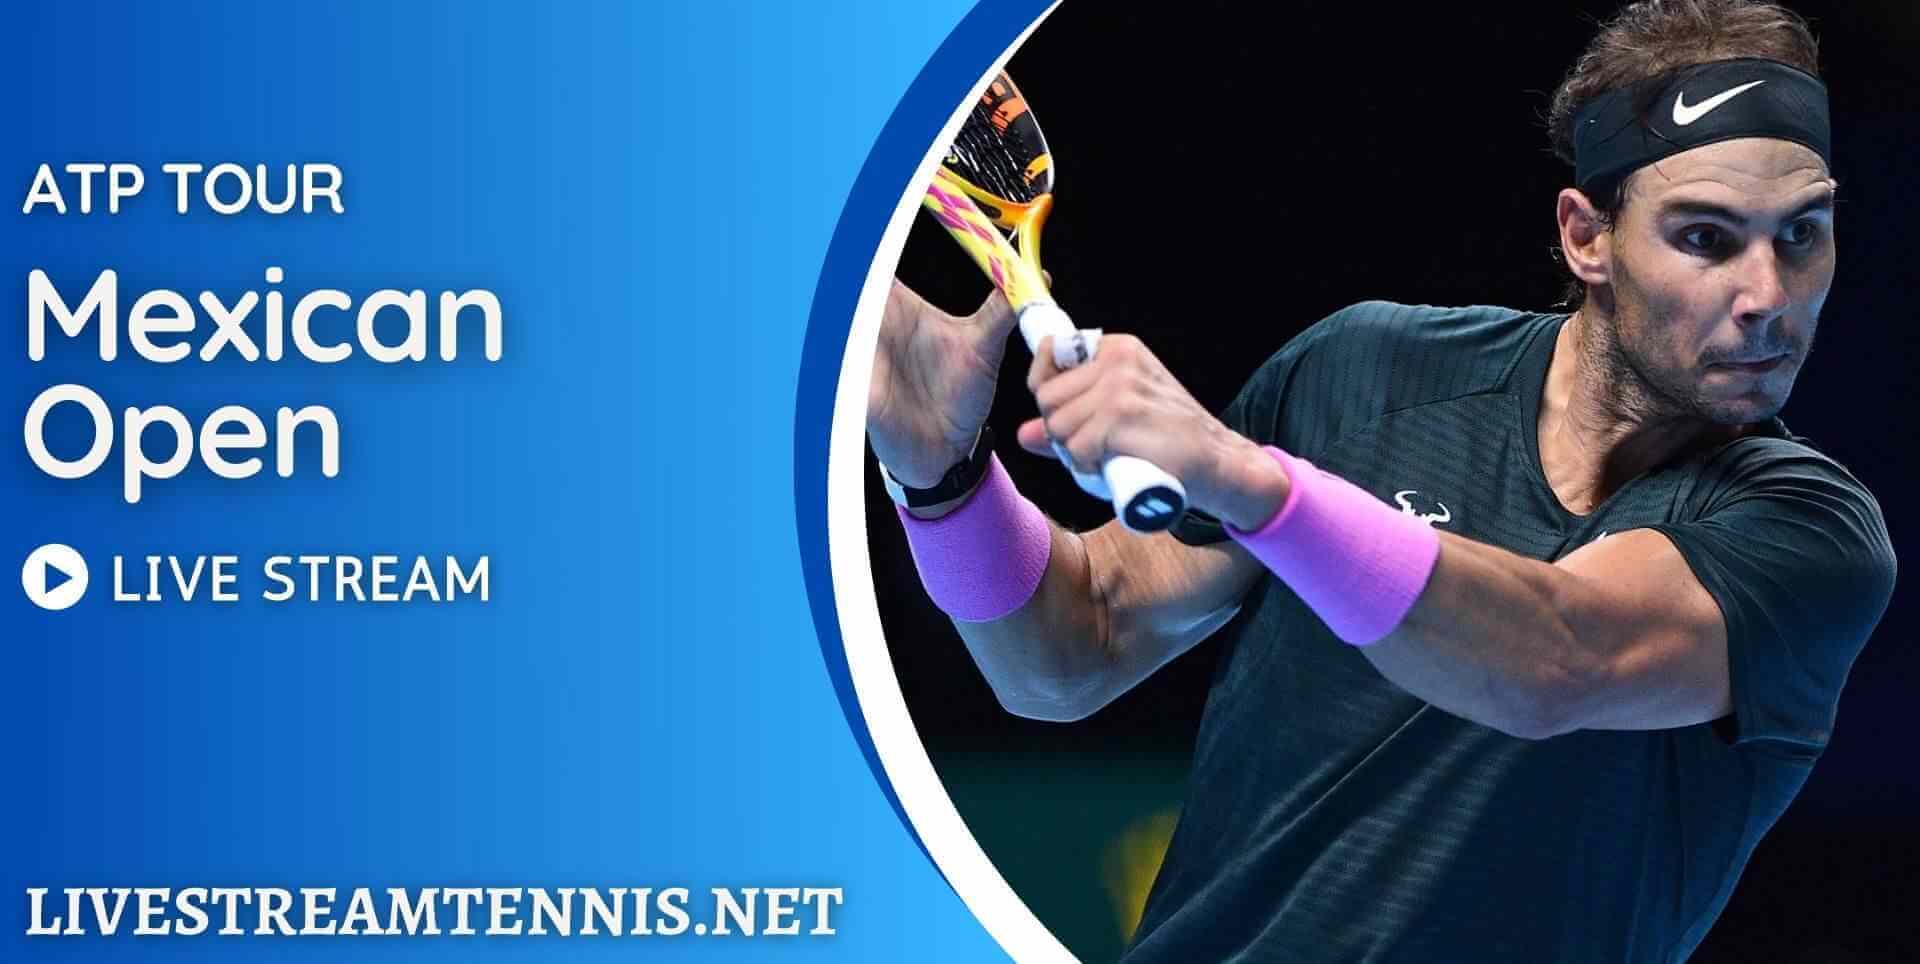 Mexican Open ATP Tennis Live Stream